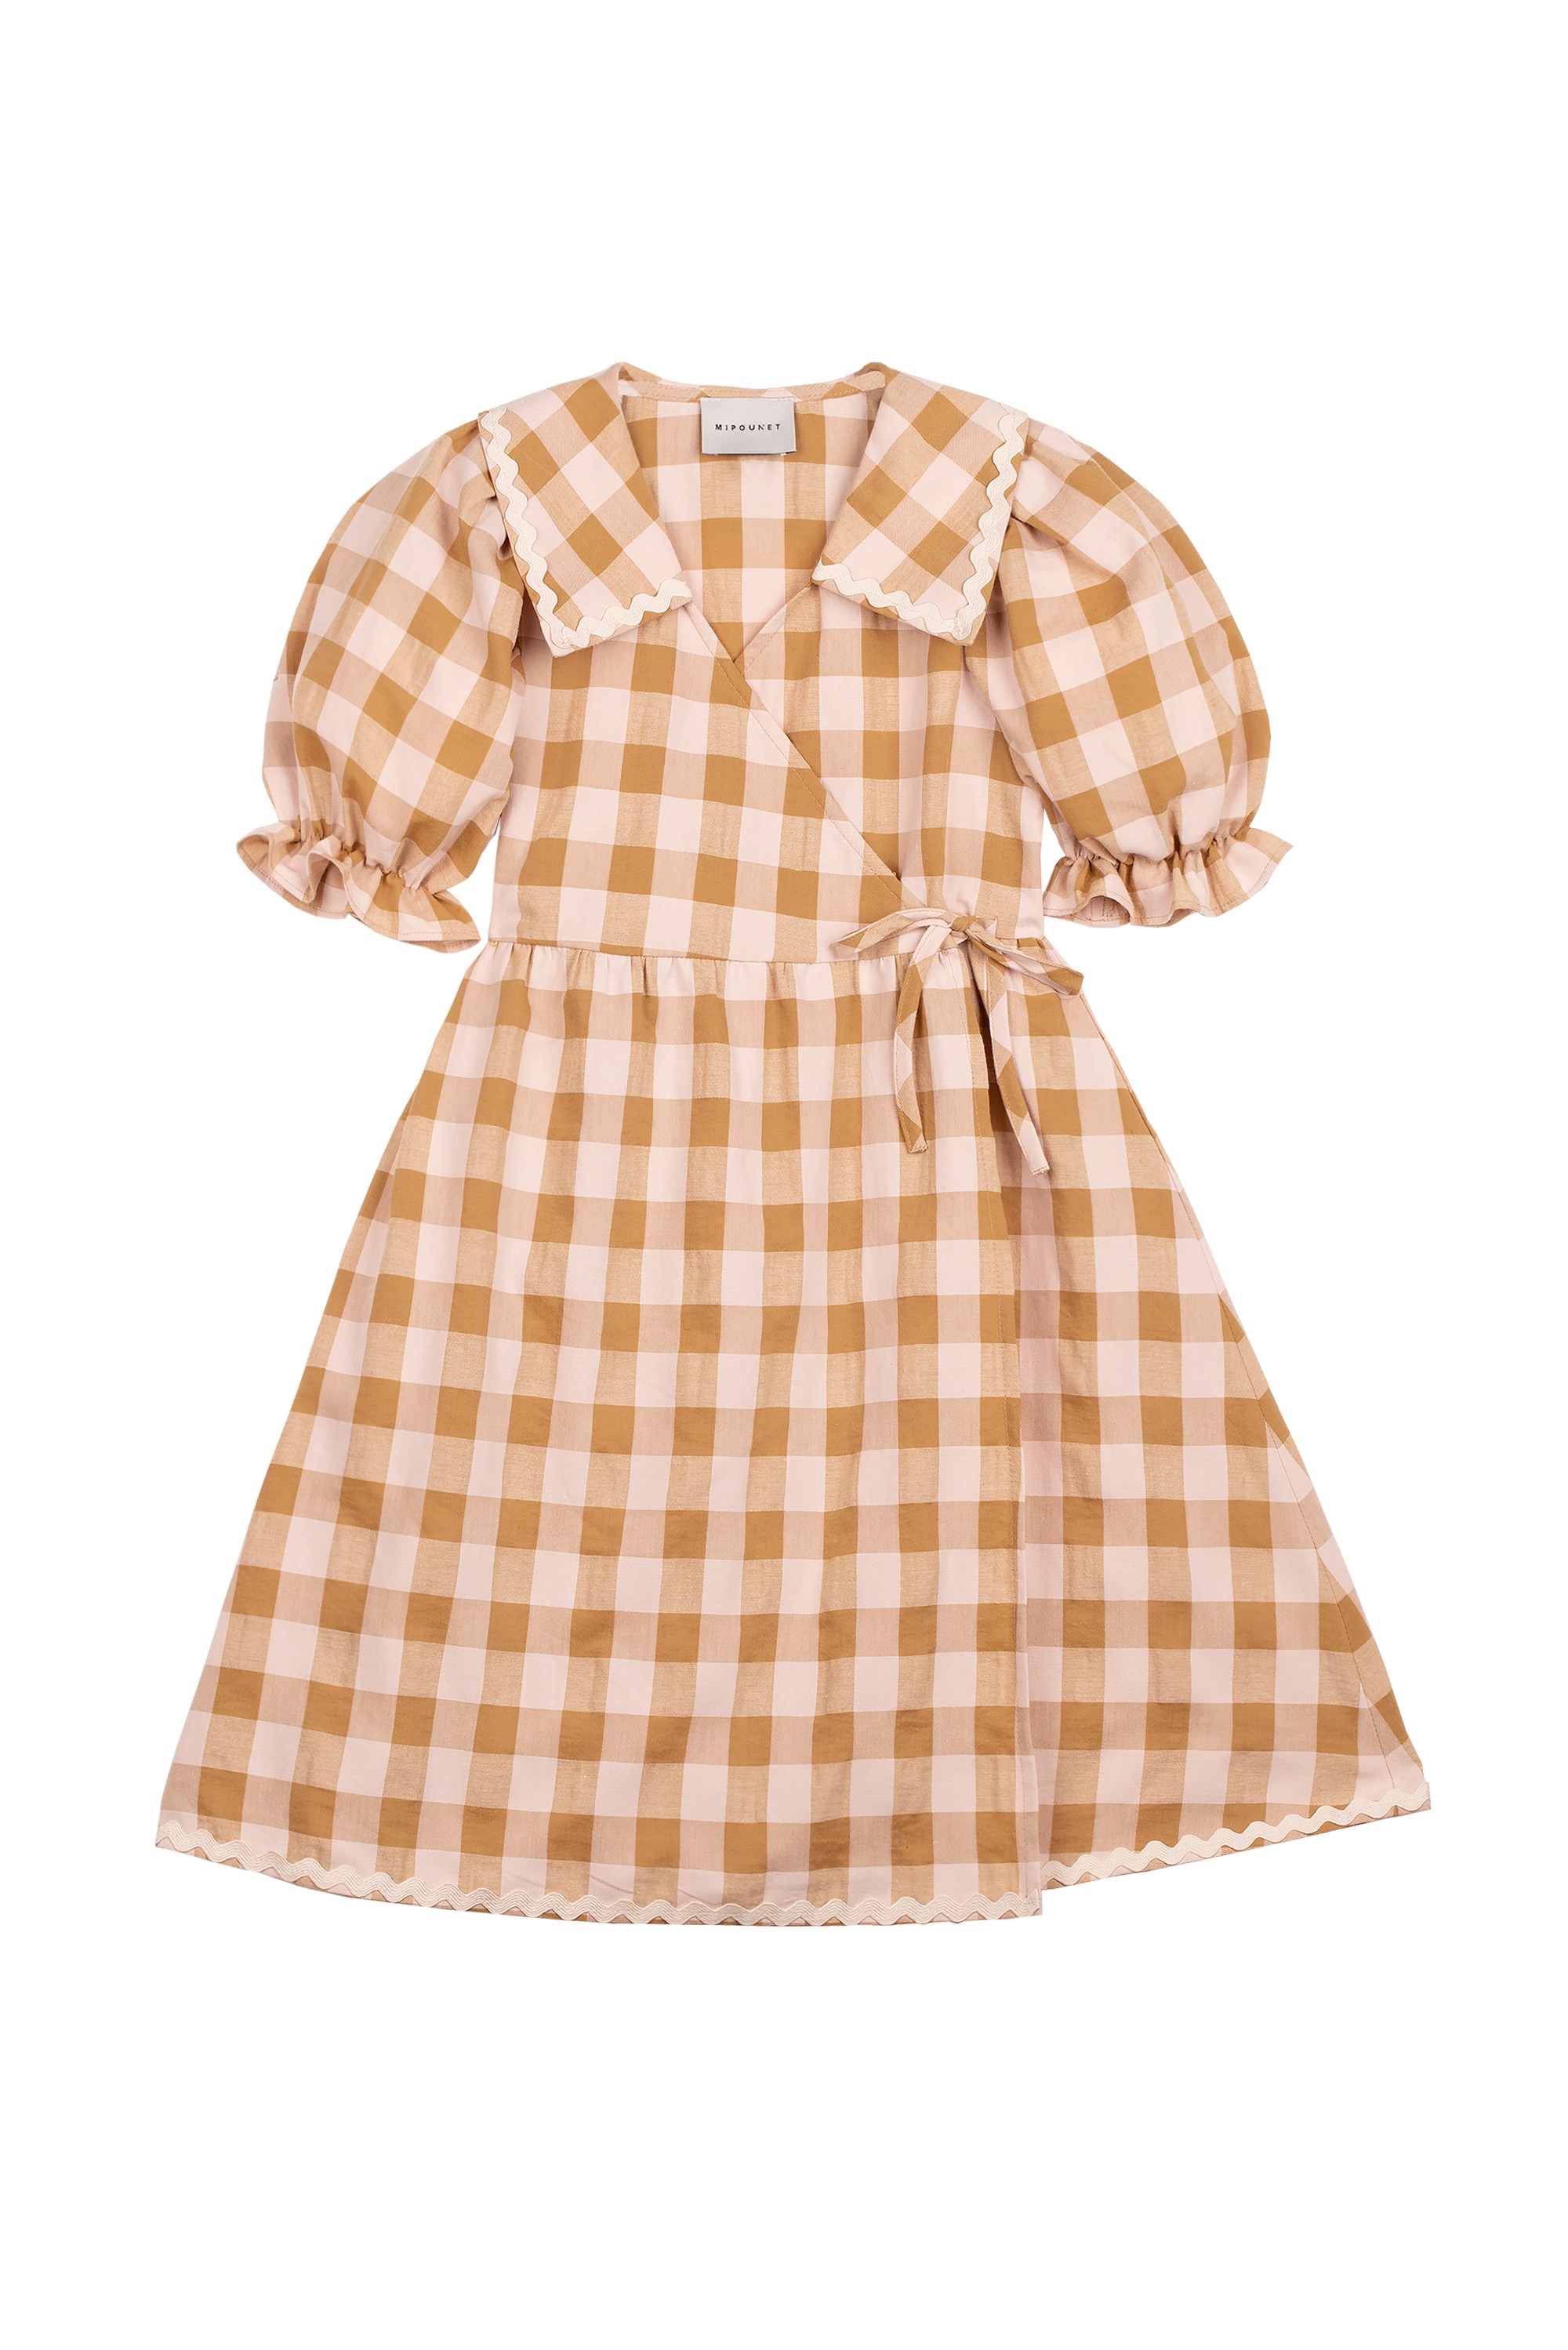 MIPOUNET | SIENNA VICHY COLLARED BLOUSE